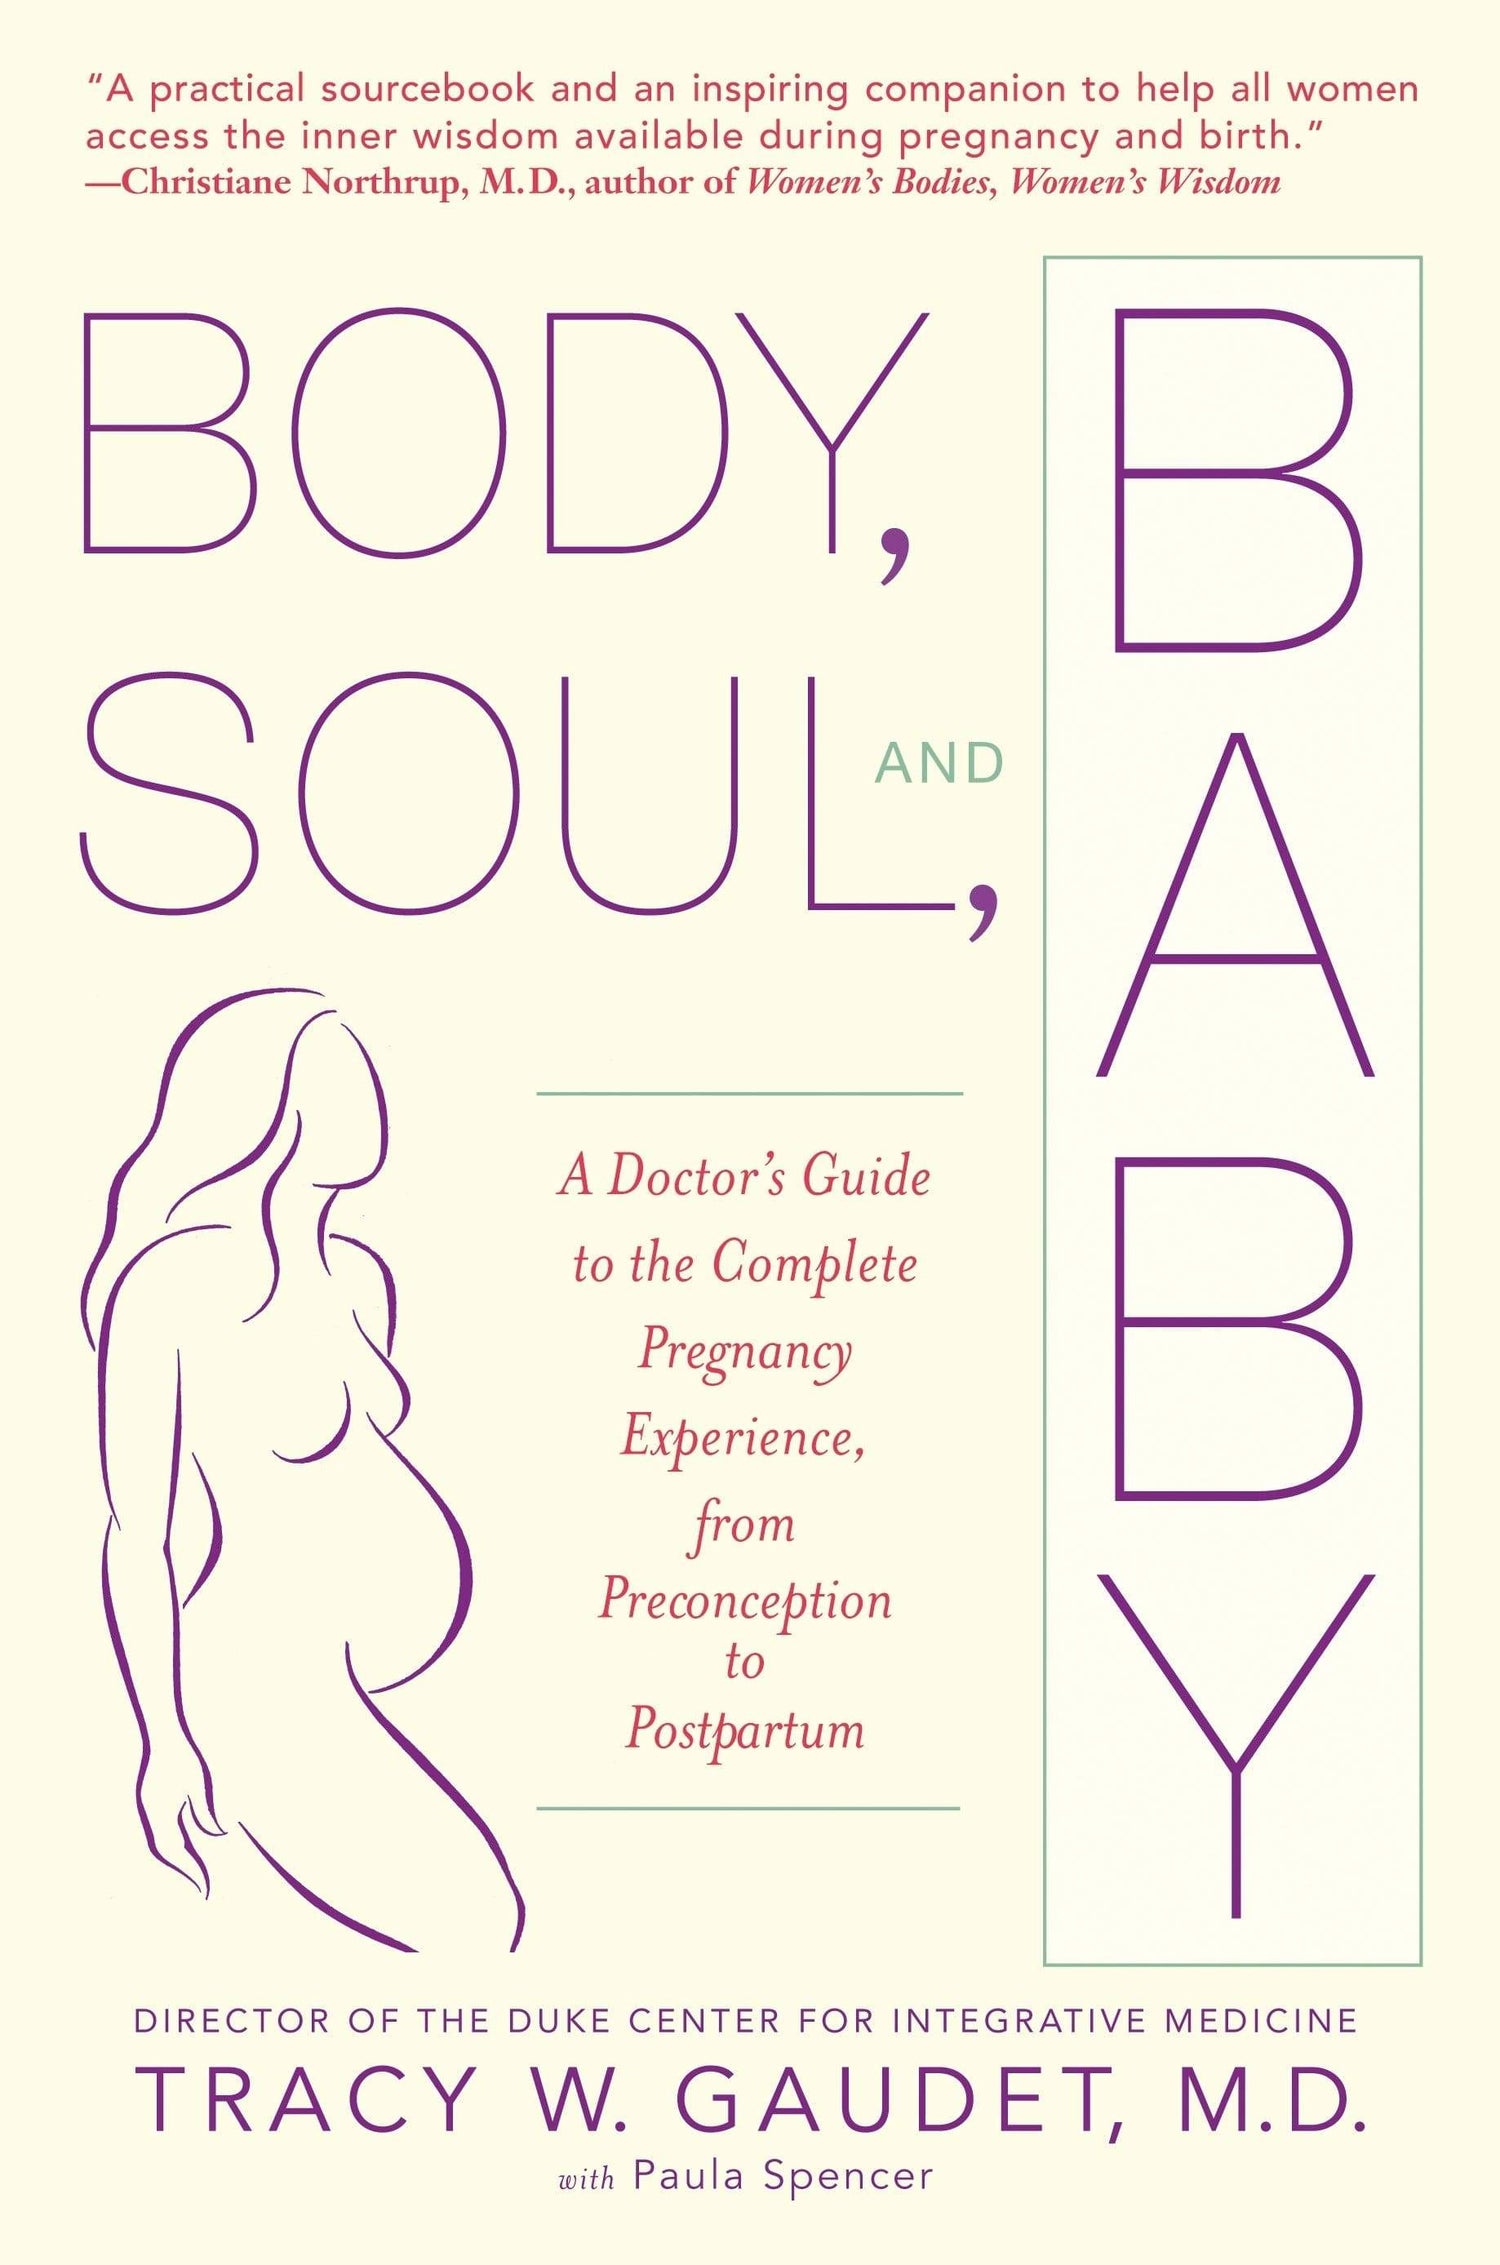 Body, Soul, And Baby